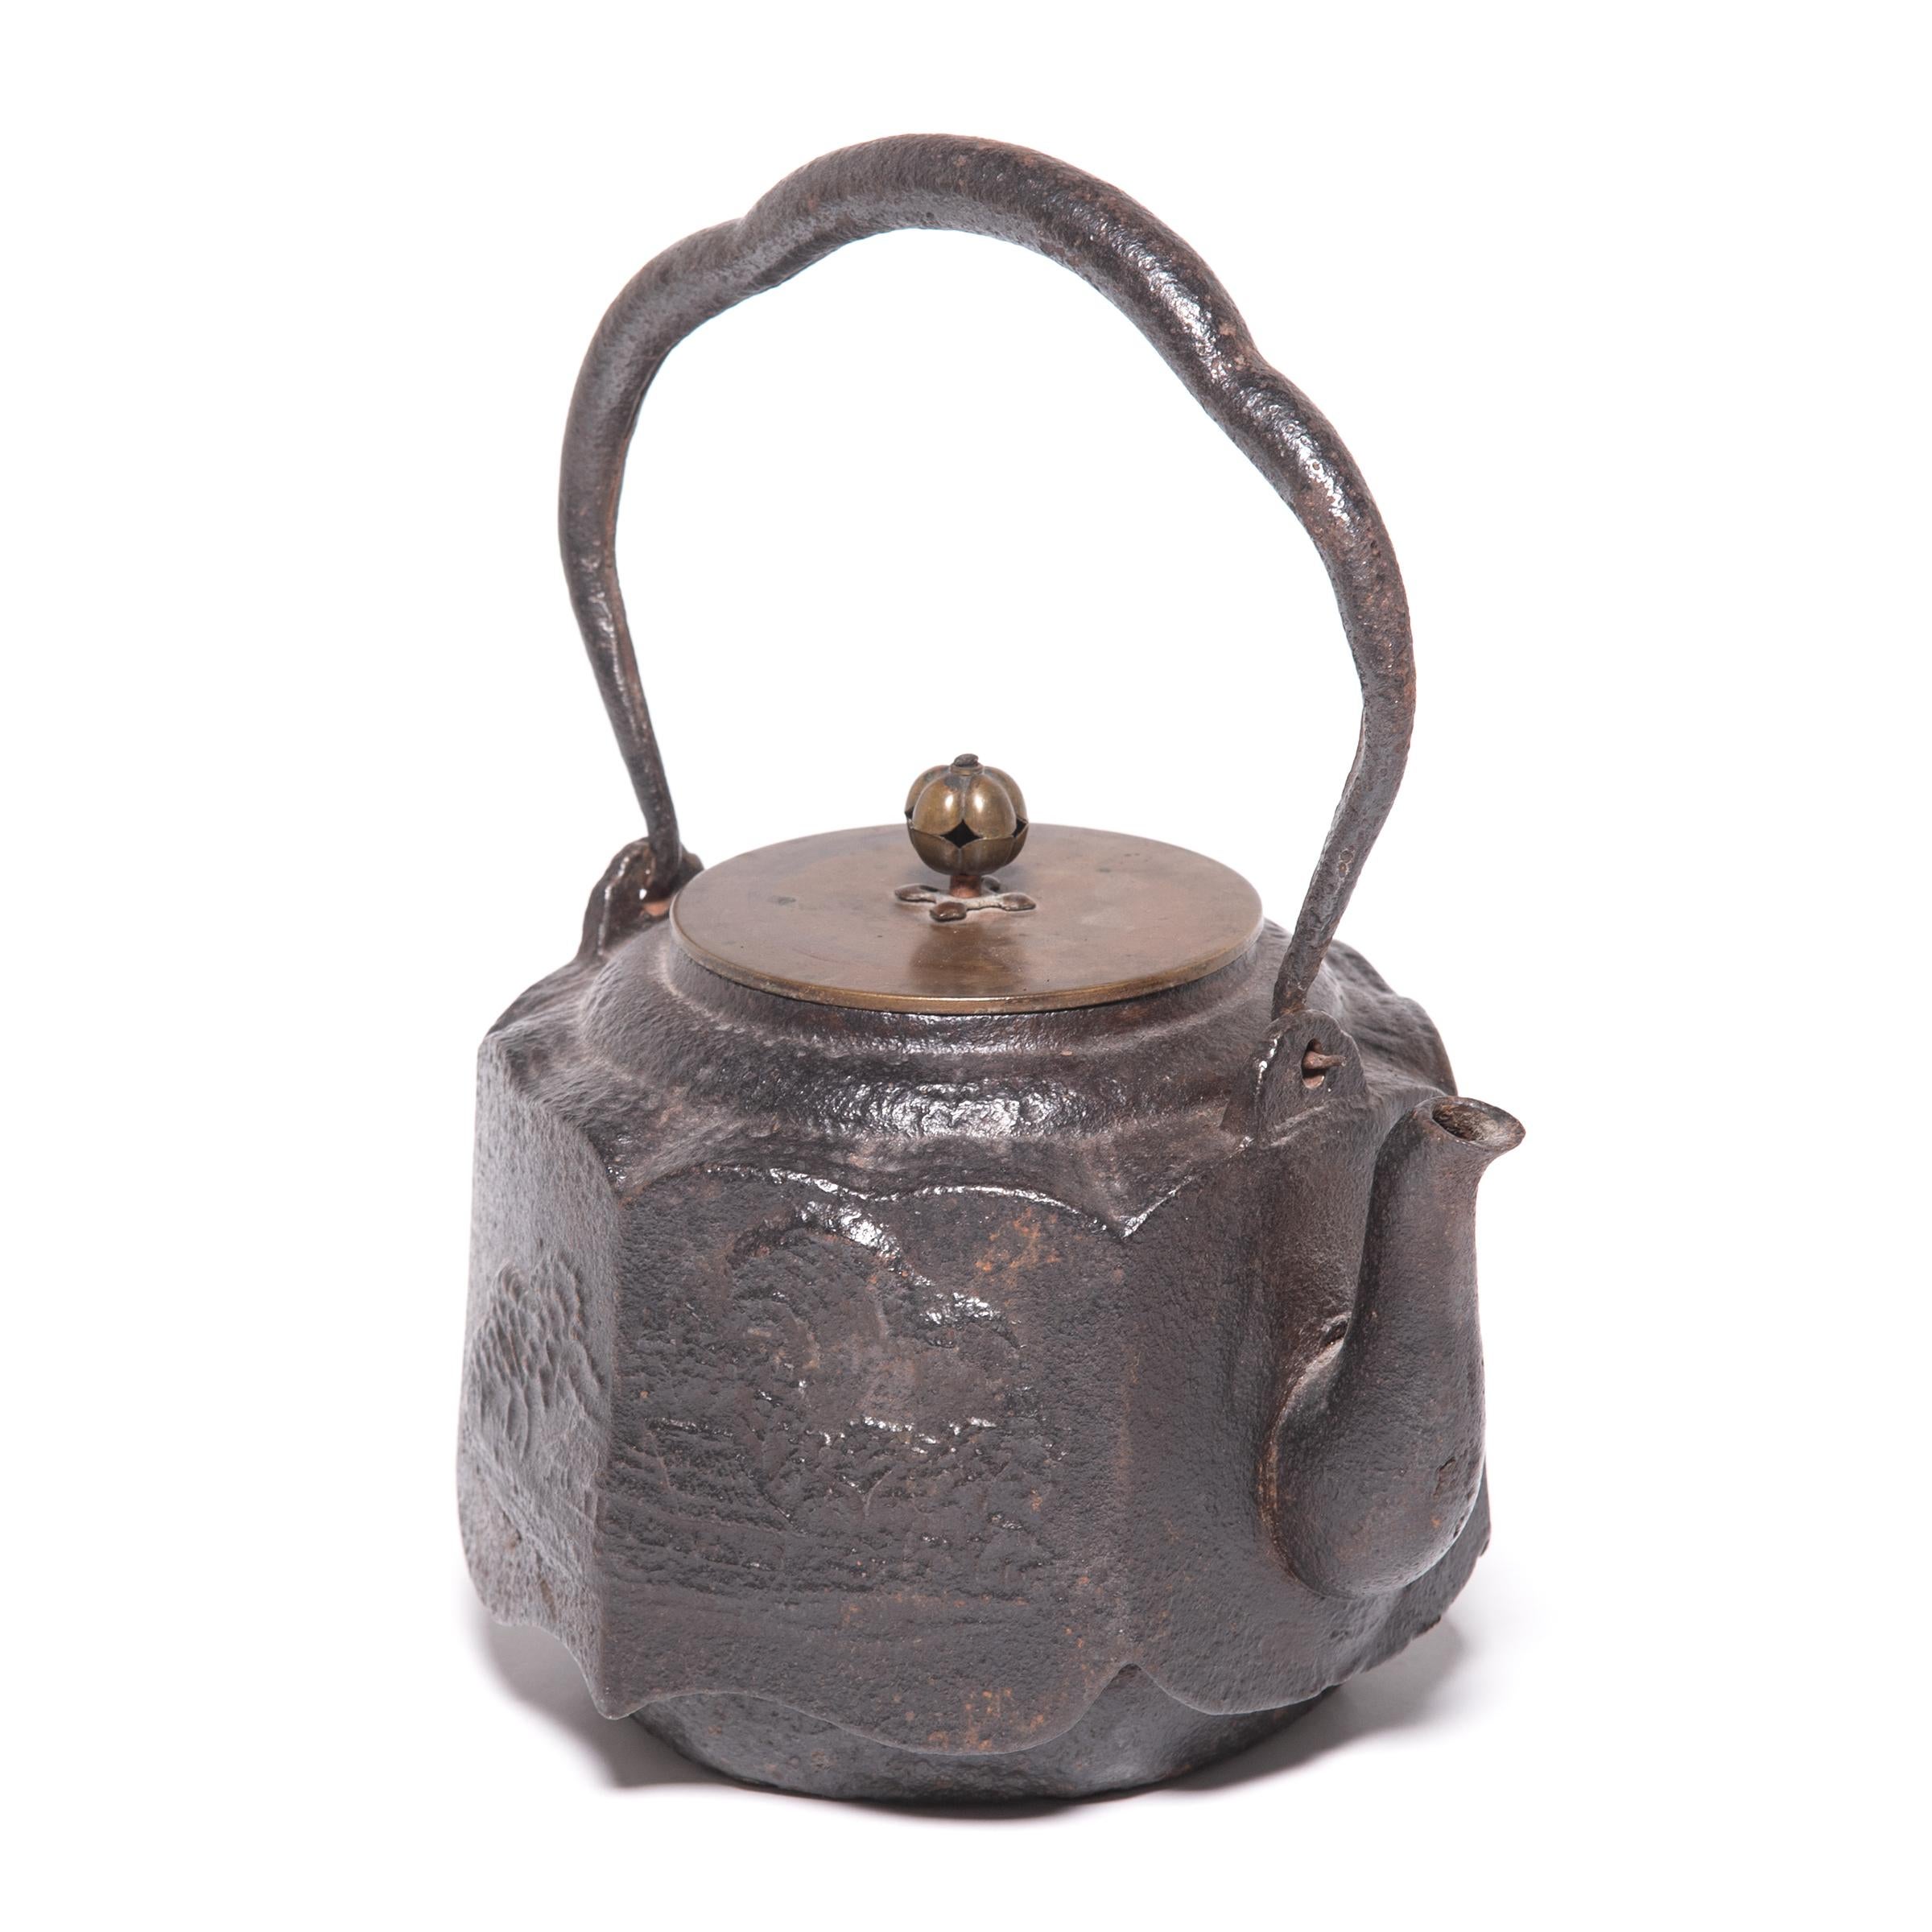 Decorated with an irregular, textured surface and an elegant, arched handle, this Japanese teapot was used to boil water for traditional tea ceremonies. Known as tetsubin, the kettle’s cast iron construction is said to change the quality of the